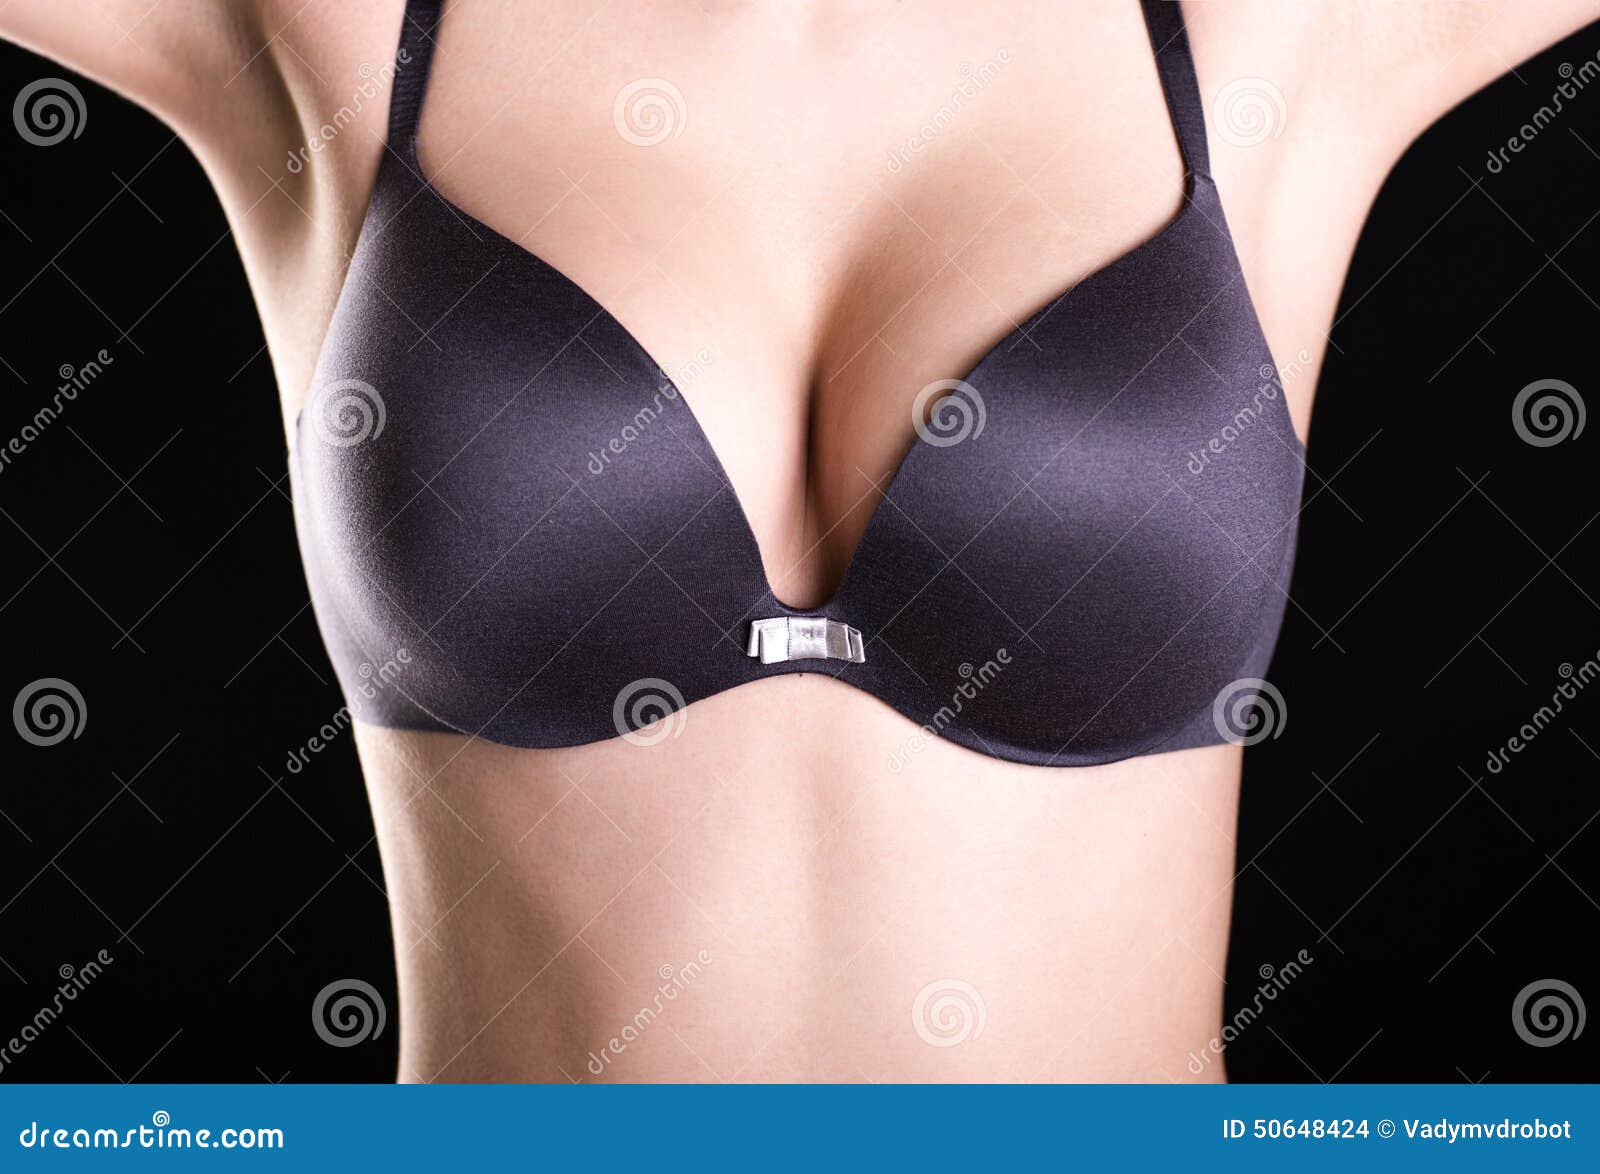 Woman s breasts in bra stock photo. Image of beautiful - 50648424